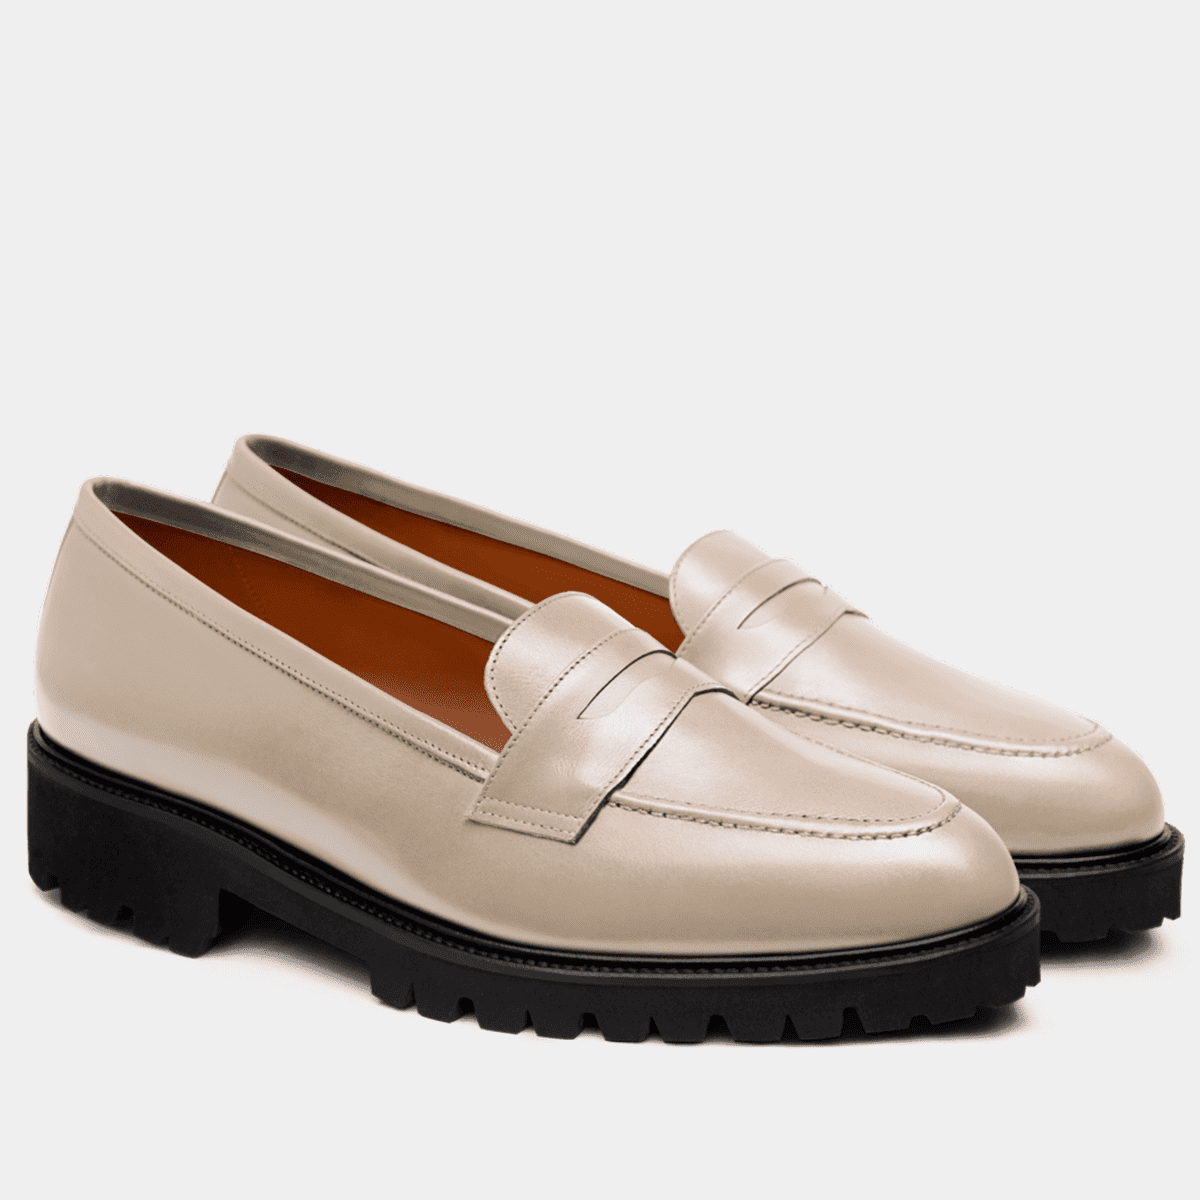 Women's Penny Loafers - Sumissura